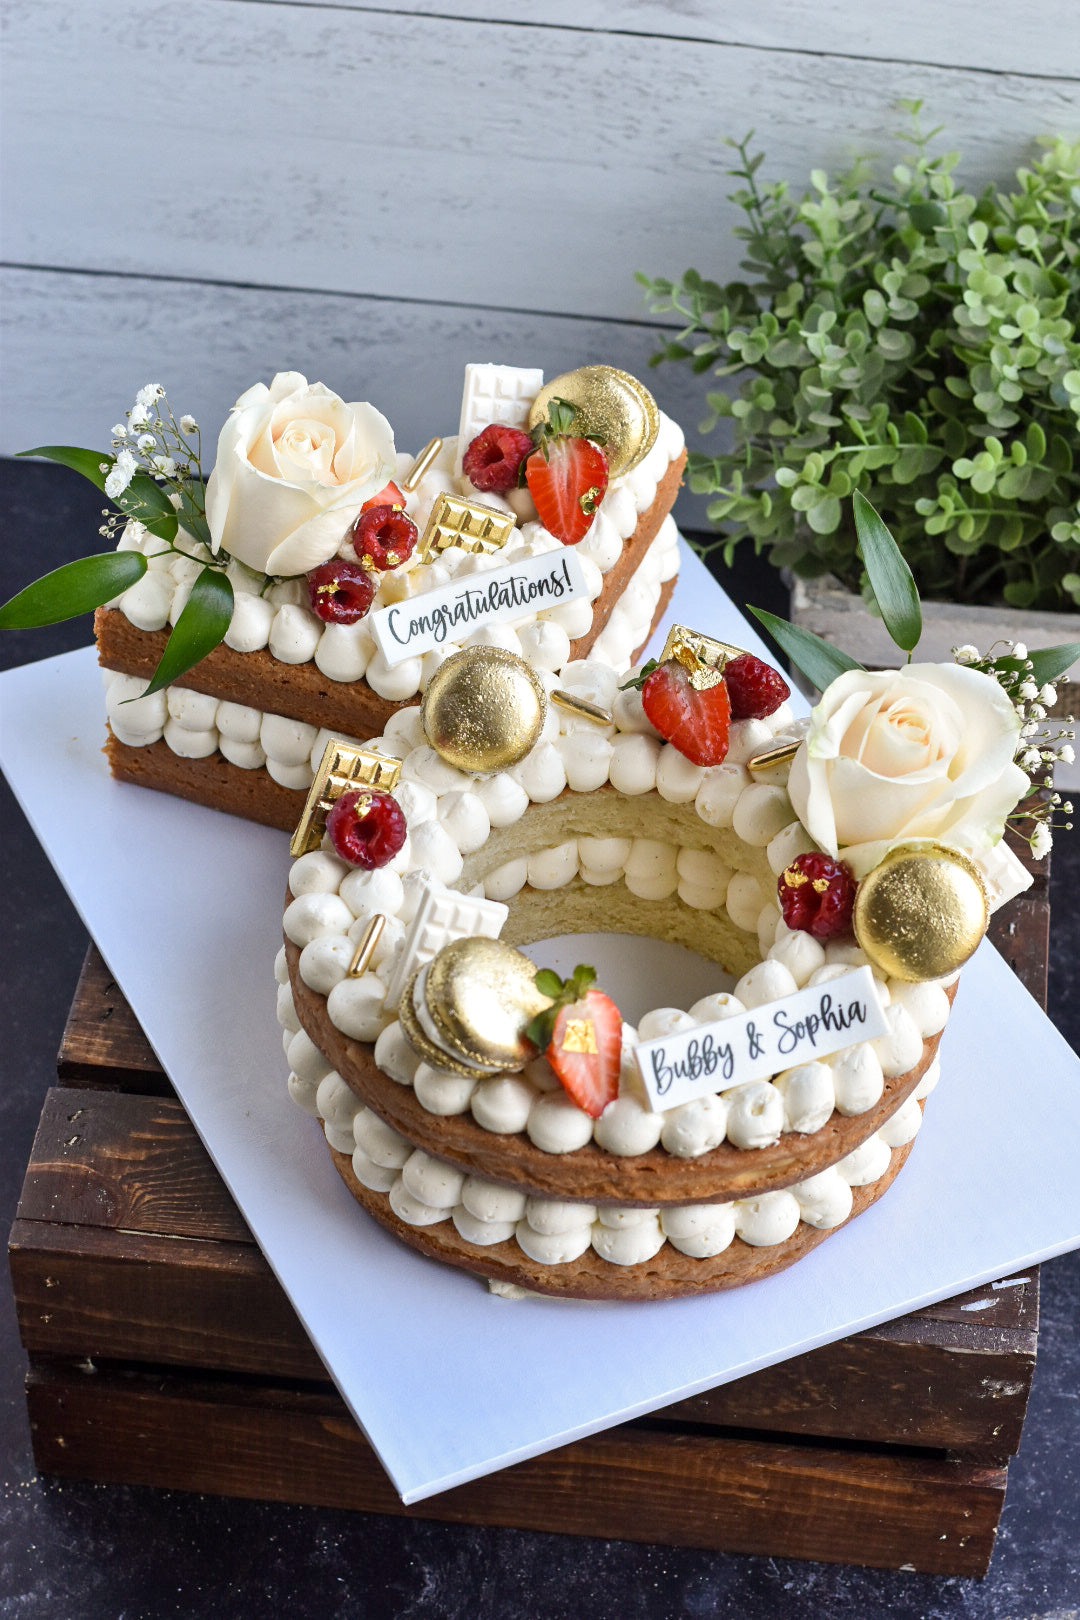 23 Bridal Shower Cake Ideas to Inspire Your Own